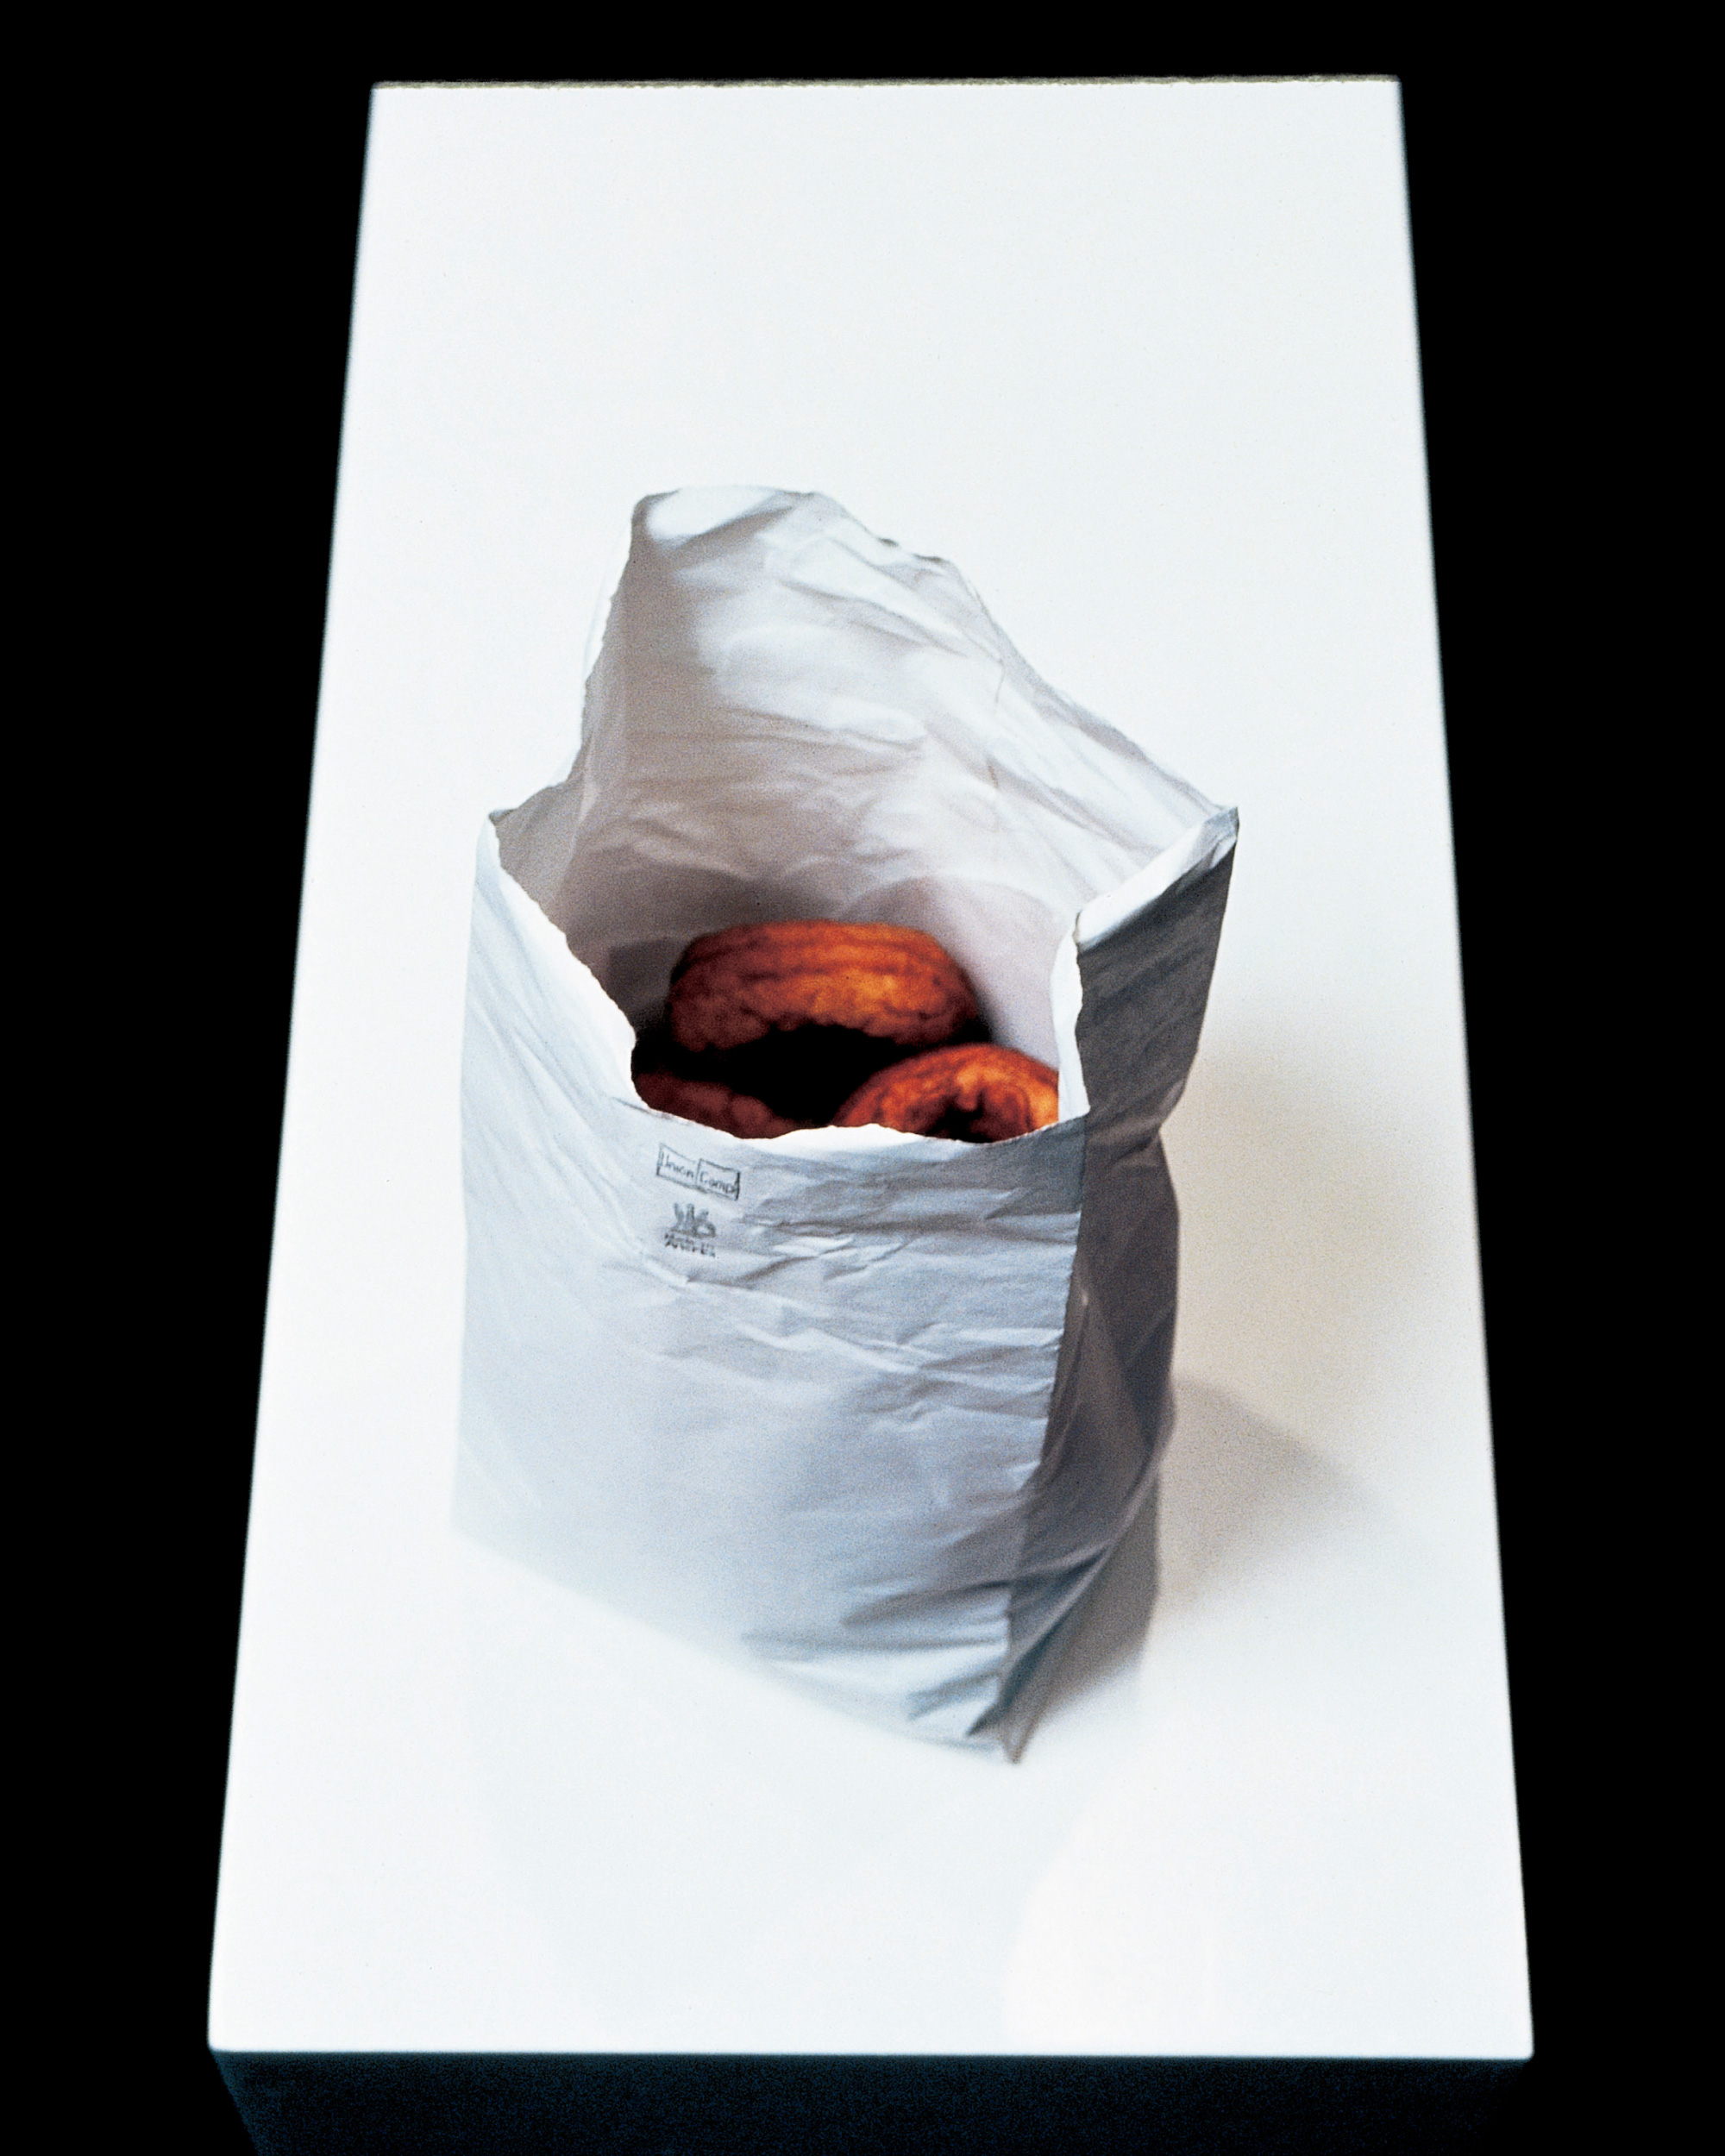 A 1989 sculpture by Robert Gober entitled “Bag of Donuts.”